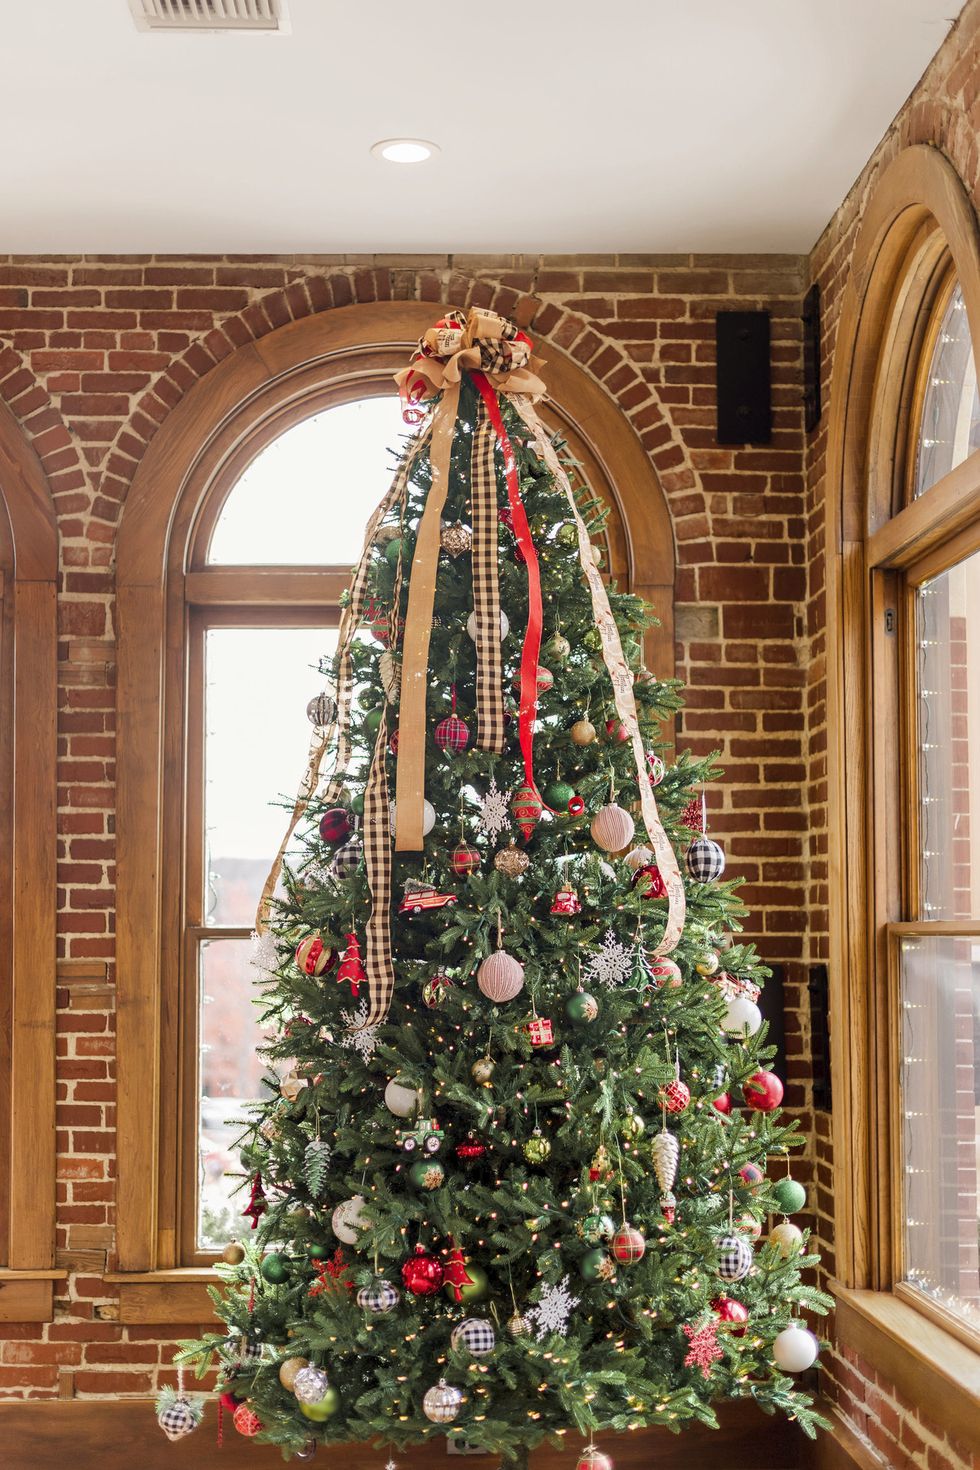 The 10 Best Christmas Decorations to Buy Now